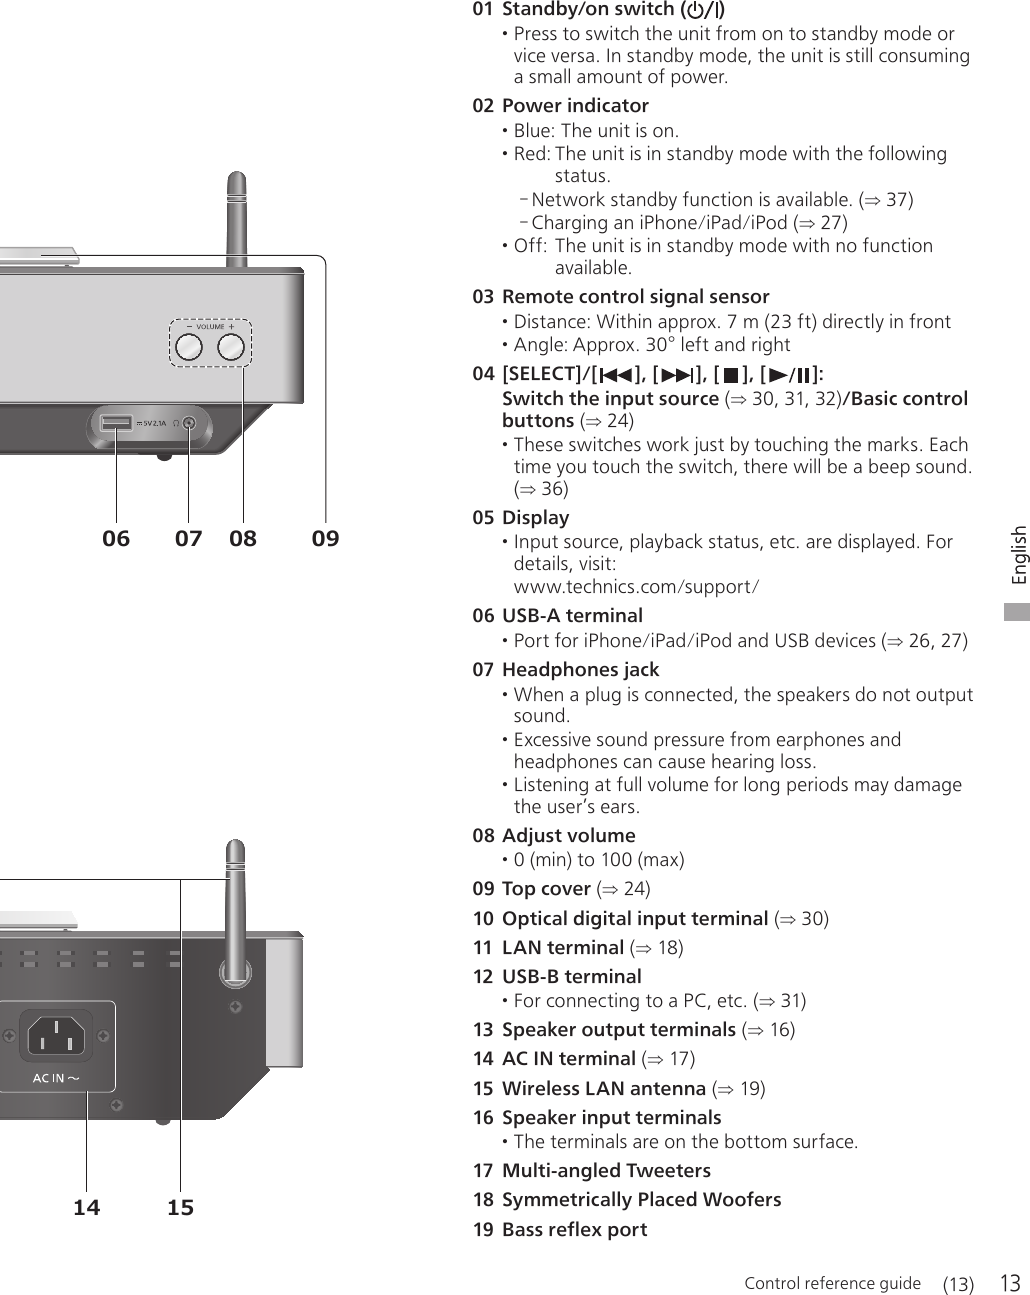 13EnglishEnglish Control reference guide     01  Standby/on switch ( ) • Press to switch the unit from on to standby mode or vice versa. In standby mode, the unit is still consuming a small amount of power. 02  Power indicator • Blue:  The unit is on. • Red:  The unit is in standby mode with the following status. - Network standby function is available. ( 37) - Charging an iPhone/iPad/iPod ( 27) • Off:   The unit is in standby mode with no function available. 03  Remote control signal sensor • Distance:  Within approx. 7 m (23 ft) directly in front • Angle:  Approx. 30° left and right 04  [SELECT]/[ ], [ ], [ ], [ ]: Switch the input source ( 30, 31, 32)/Basic control buttons ( 24) • These switches work just by touching the marks. Each time you touch the switch, there will be a beep sound. ( 36) 05  Display • Input source, playback status, etc. are displayed. For details, visit: www.technics.com/support/ 06  USB-A terminal • Port for iPhone/iPad/iPod and USB devices ( 26, 27) 07  Headphones jack • When a plug is connected, the speakers do not output sound. • Excessive sound pressure from earphones and headphones can cause hearing loss. • Listening at full volume for long periods may damage the user’s ears. 08  Adjust volume • 0 (min) to 100 (max) 09  Top cover ( 24) 10  Optical digital input terminal ( 30) 11  LAN terminal ( 18) 12  USB-B terminal • For connecting to a PC, etc. ( 31) 13  Speaker output terminals ( 16) 14  AC IN terminal ( 17) 15  Wireless LAN antenna ( 19) 16  Speaker input terminals • The terminals are on the bottom surface. 17  Multi-angled Tweeters 18  Symmetrically Placed Woofers 19  Bass reflex port (13)